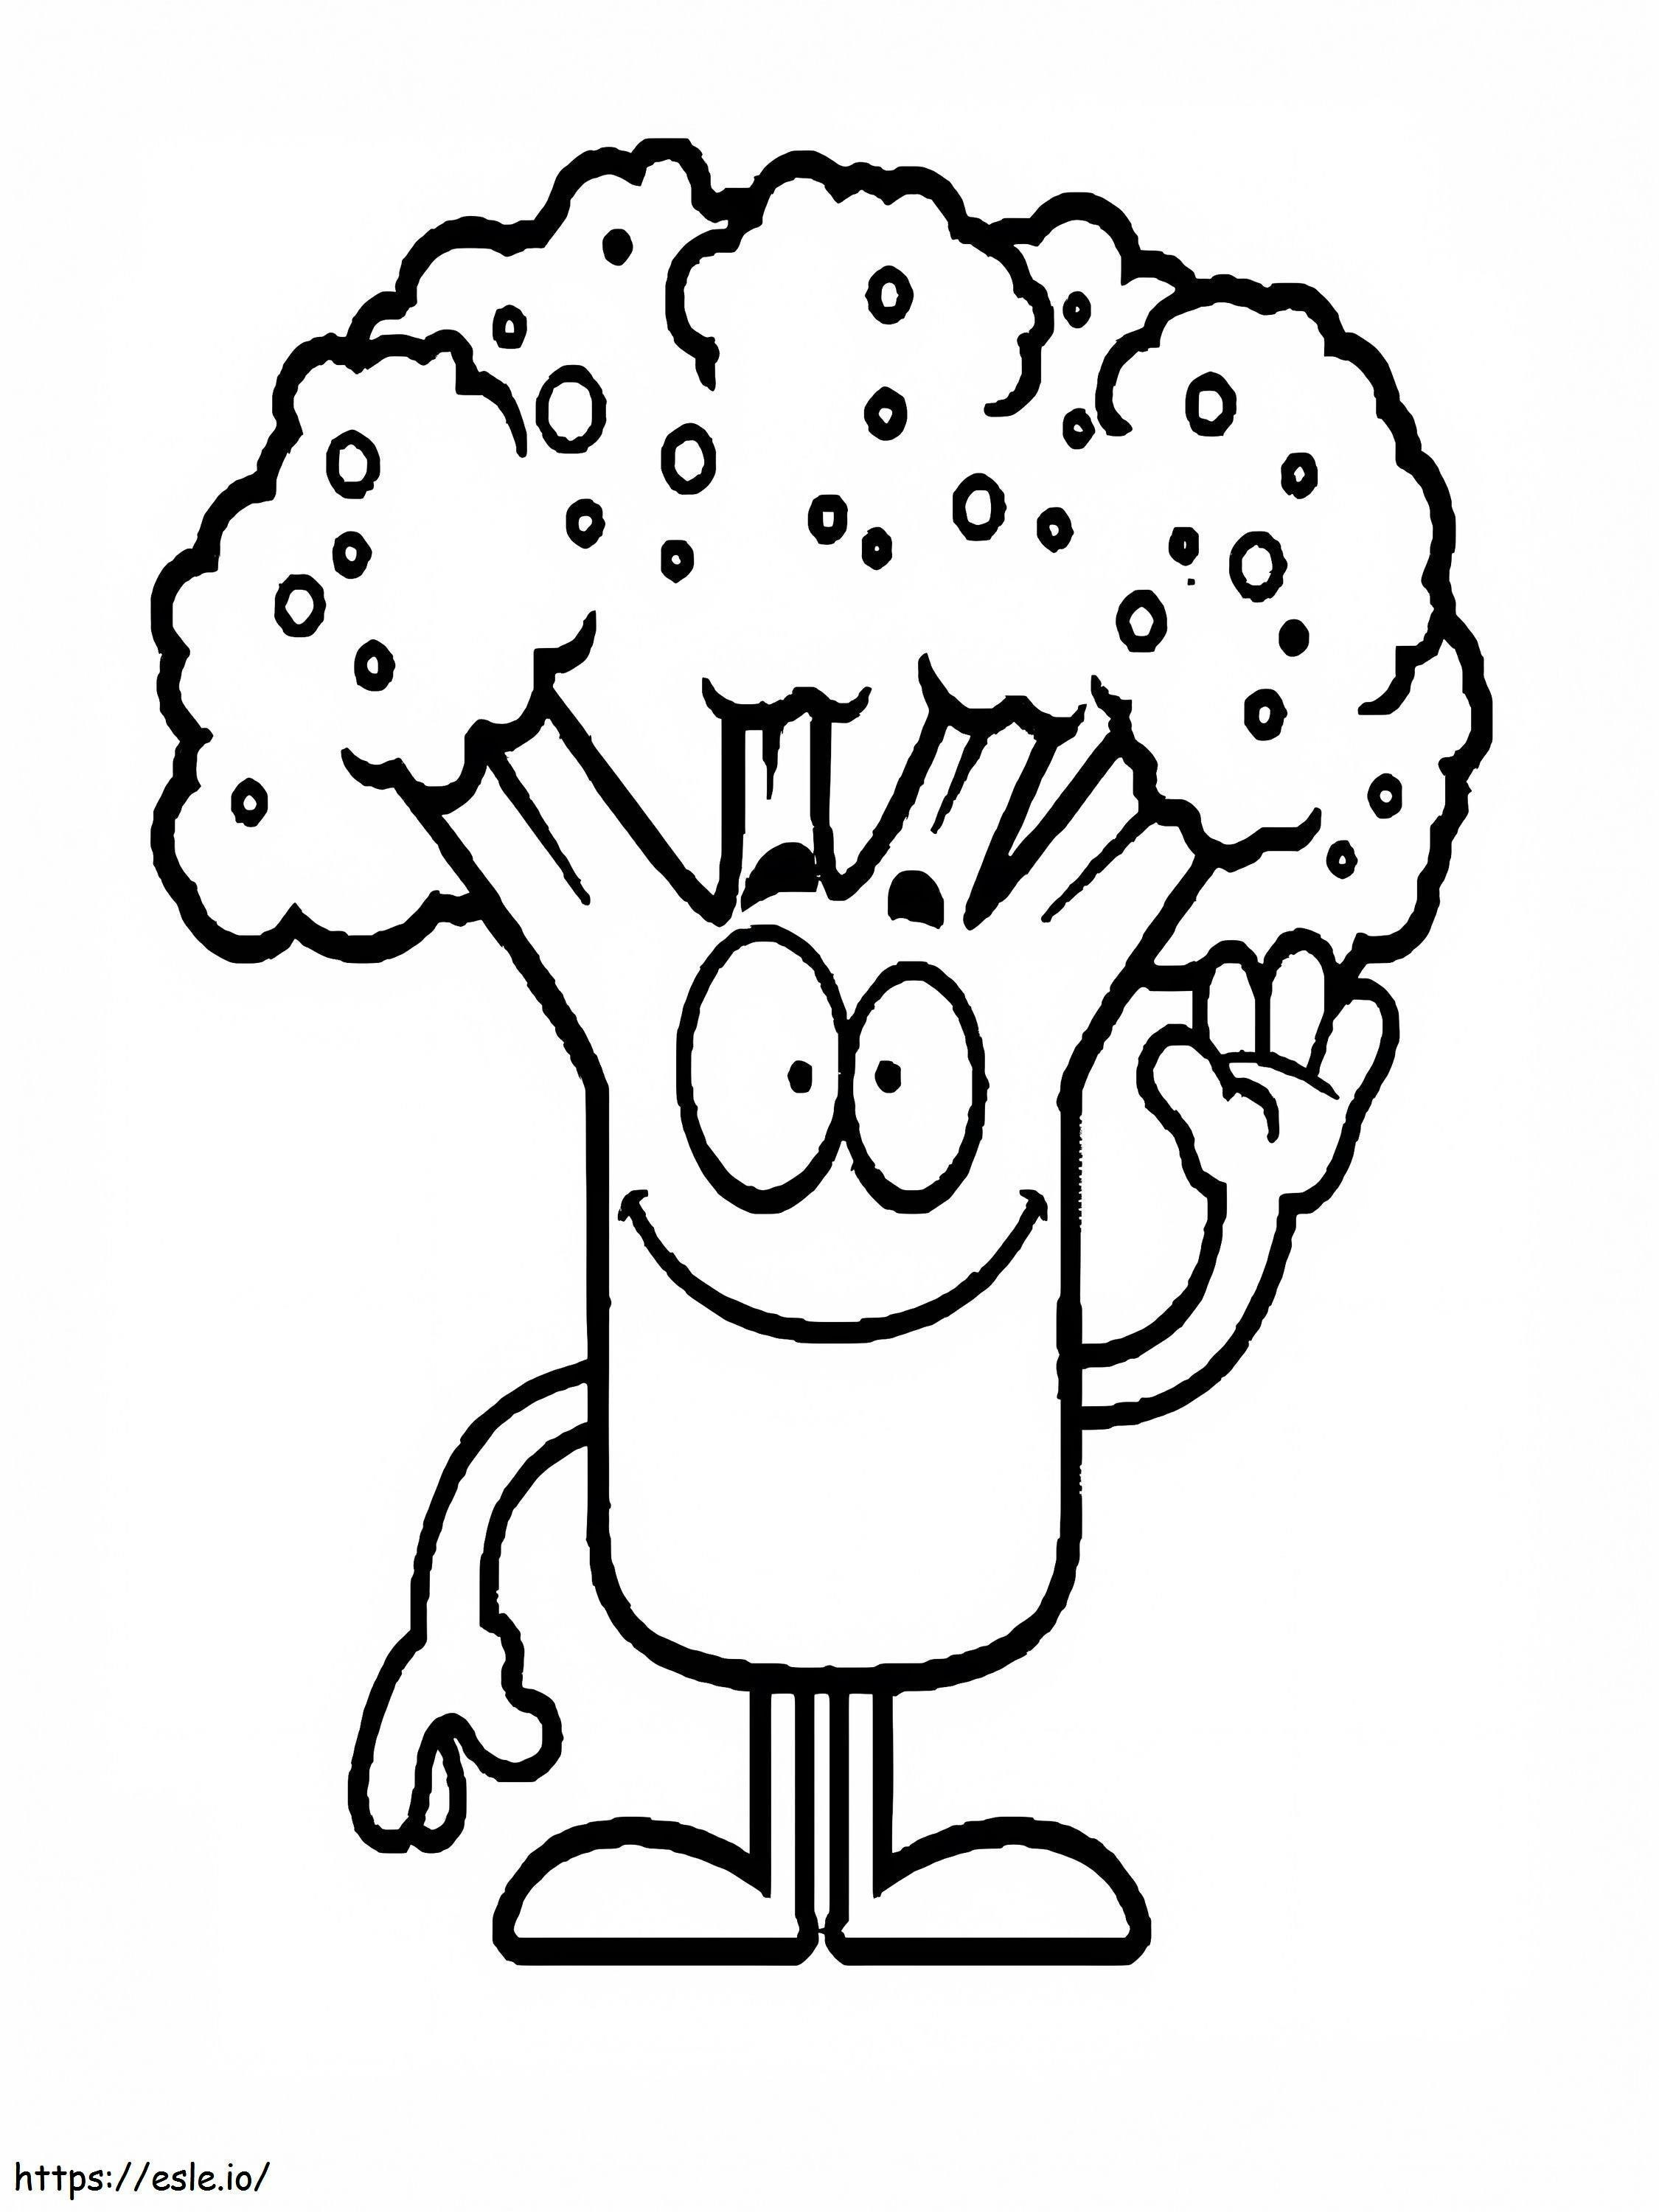 Broccoli Smiling coloring page